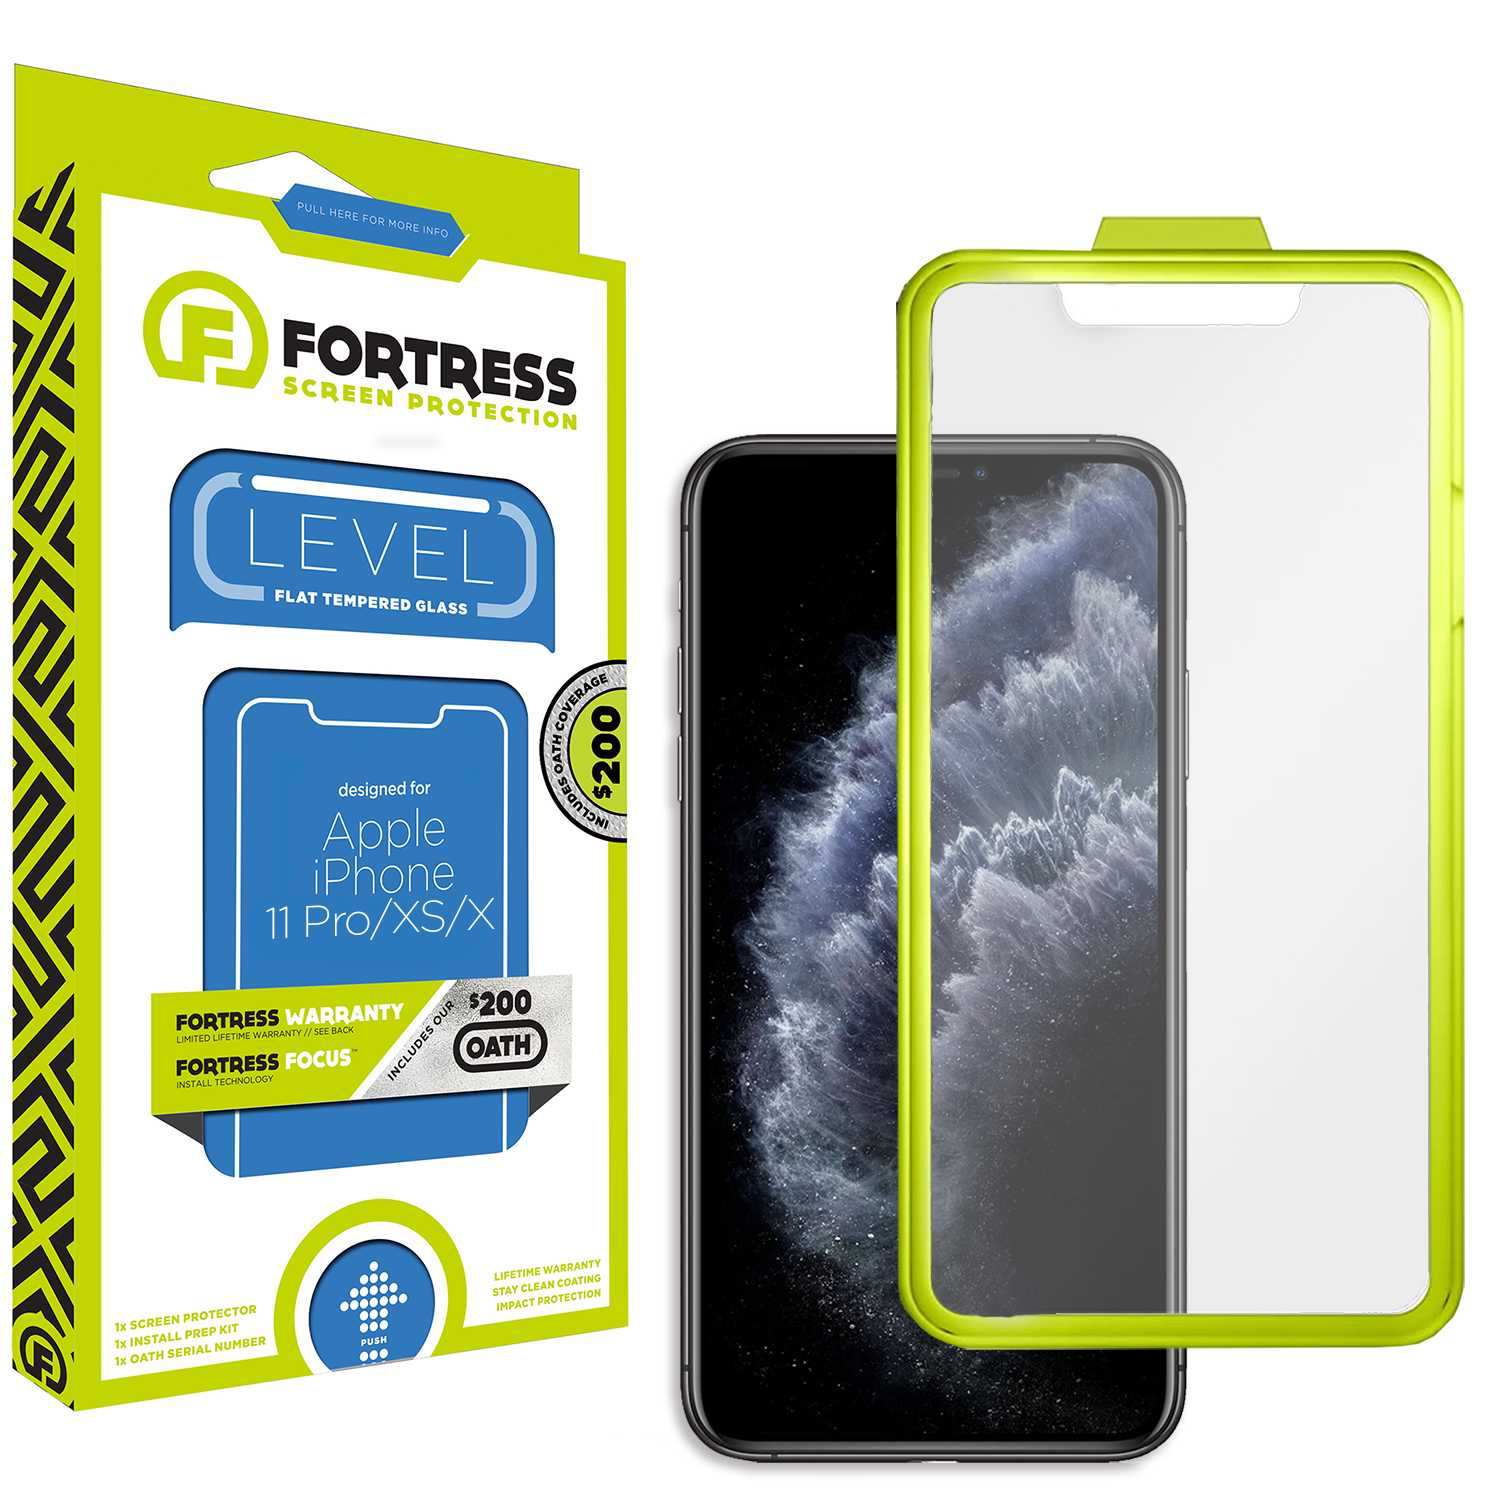 Fortress iPhone X Screen Protector $200CoverageInstallTool Scooch Screen Protector